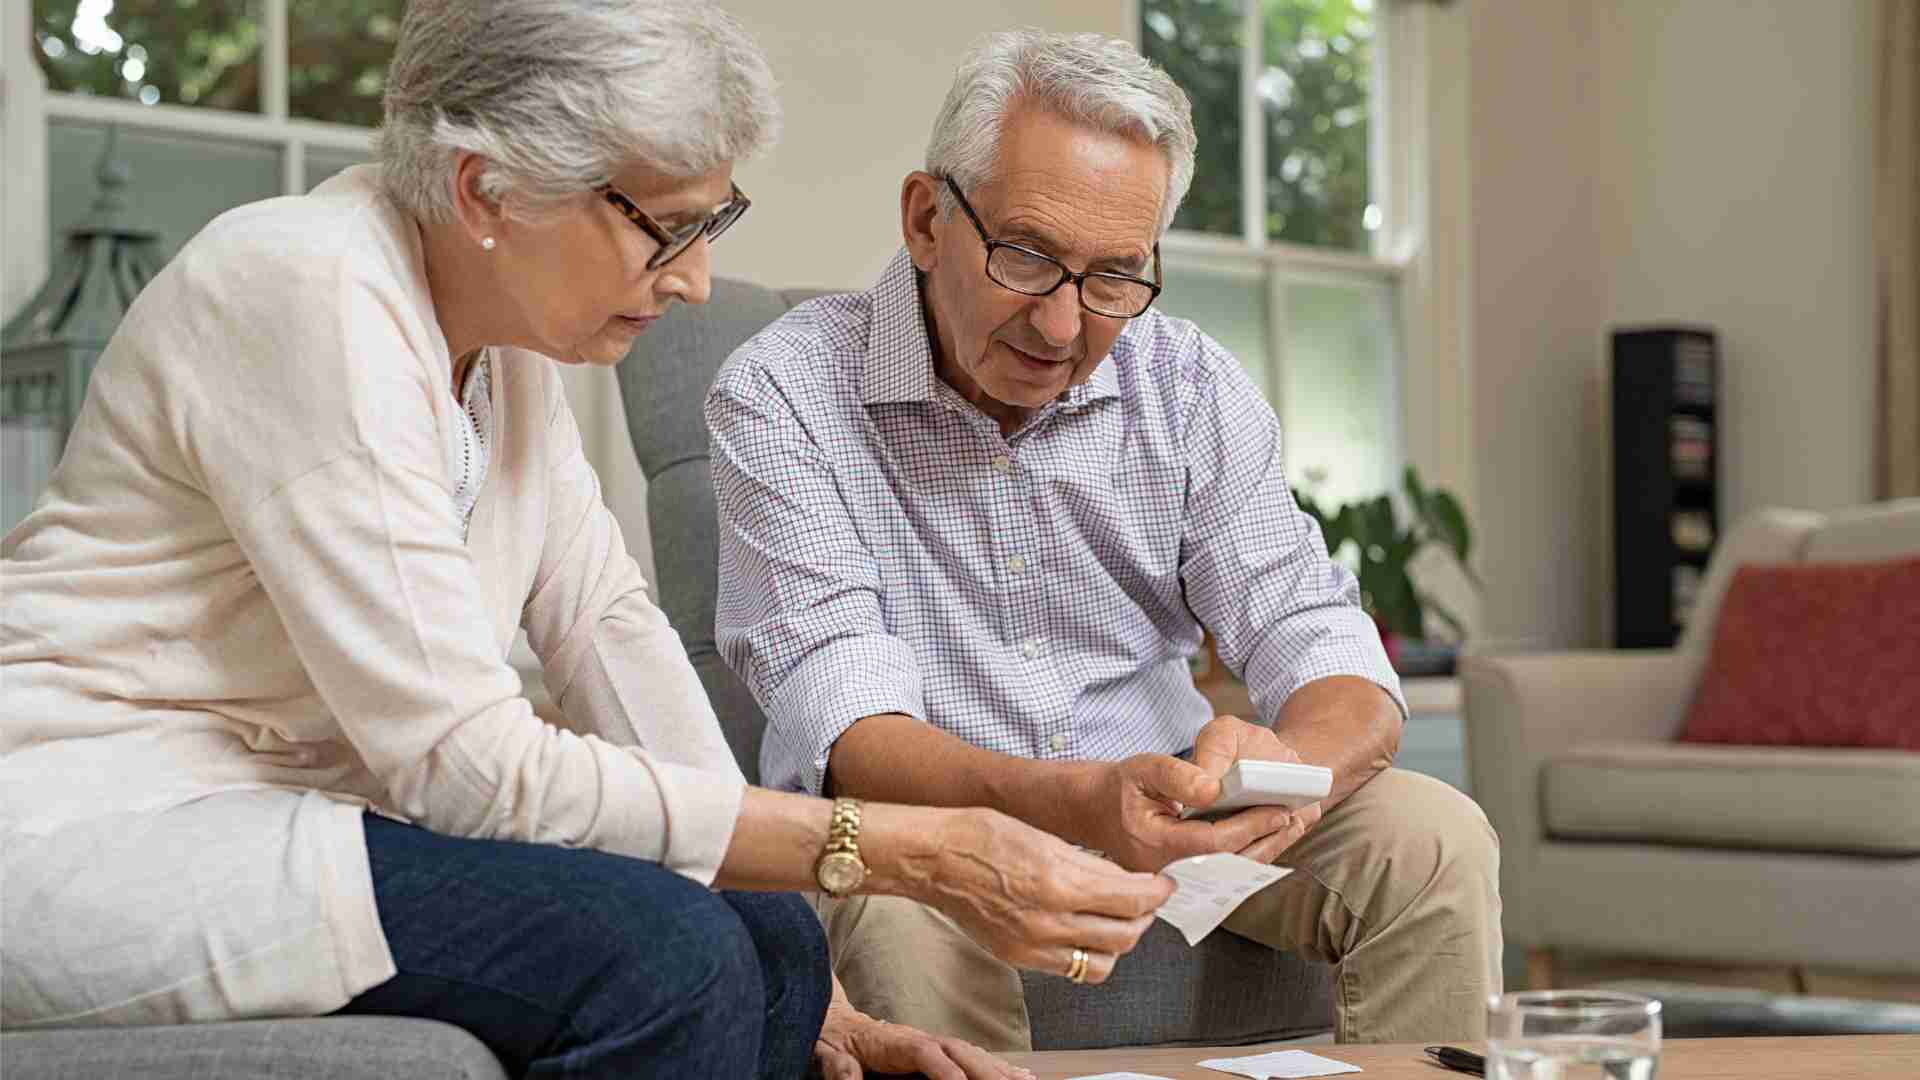 The Social Security Administration informs workers aged 62-66 of the best and easiest way to see their future retirement benefits